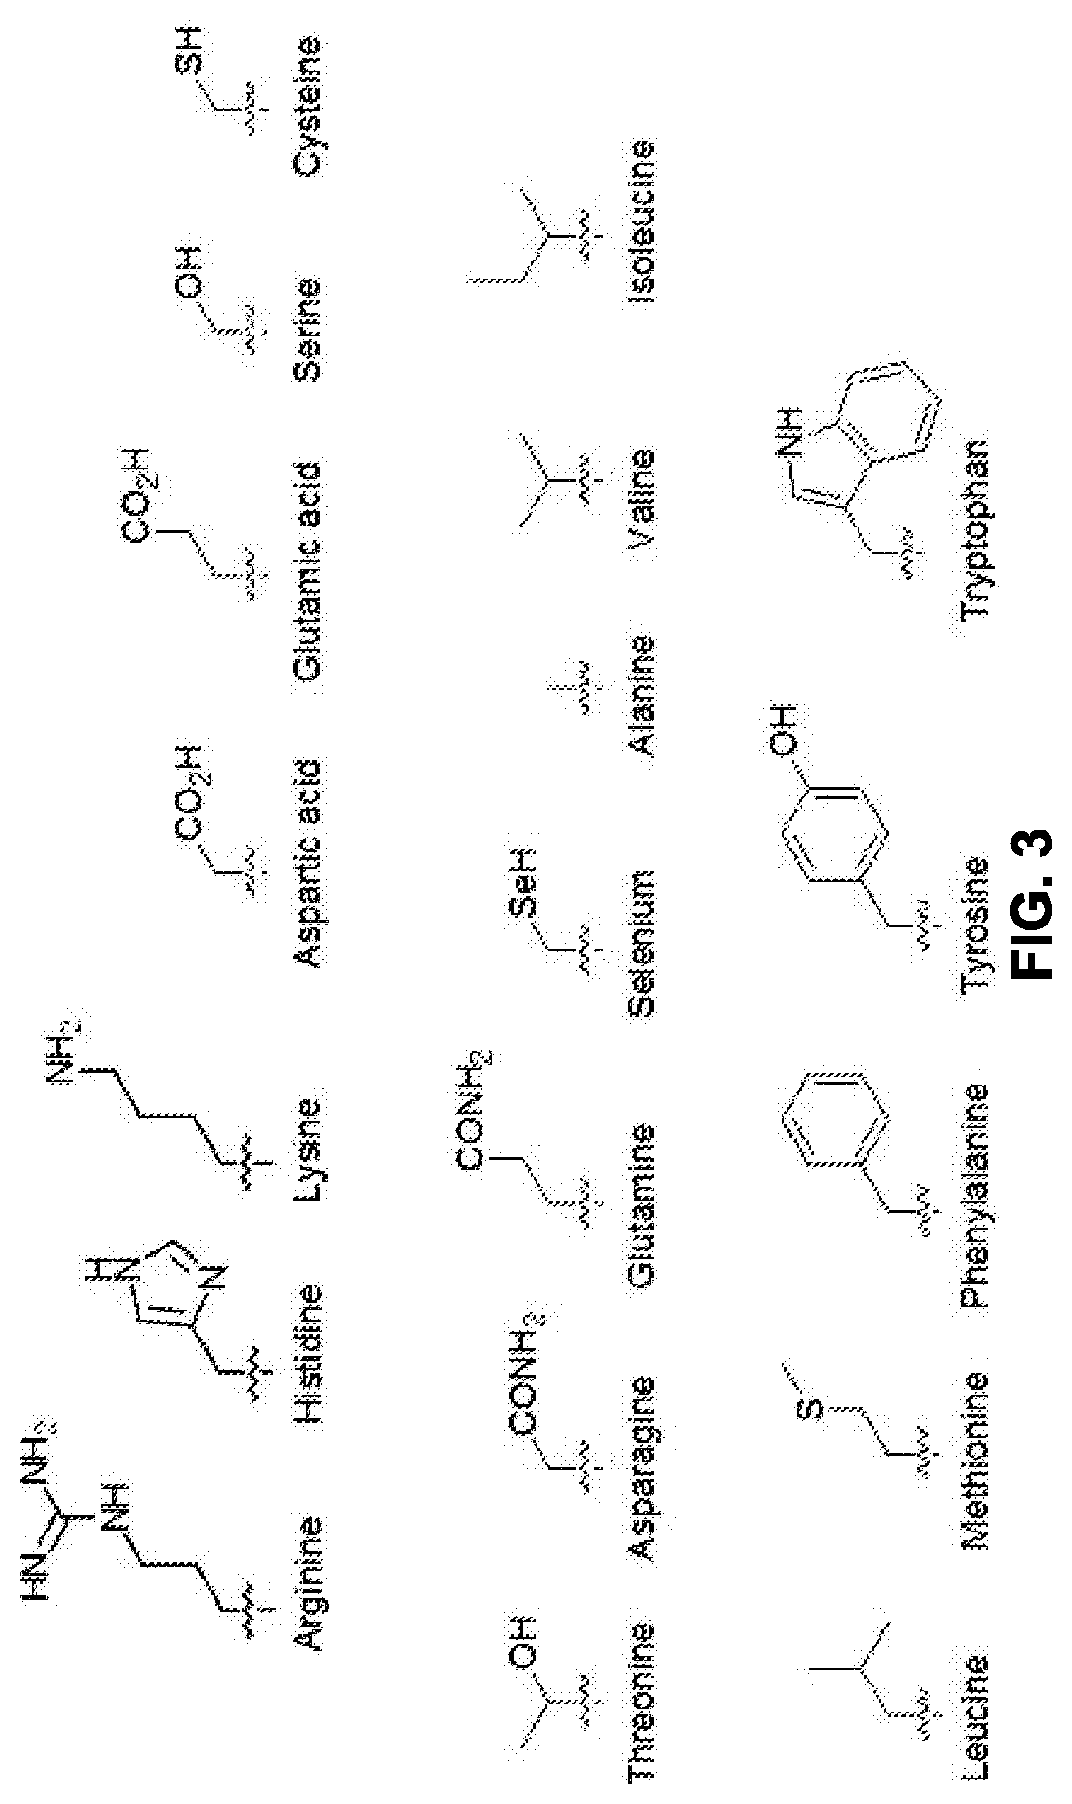 Bivalent Nucleic Acid Ligands and Uses Therefor